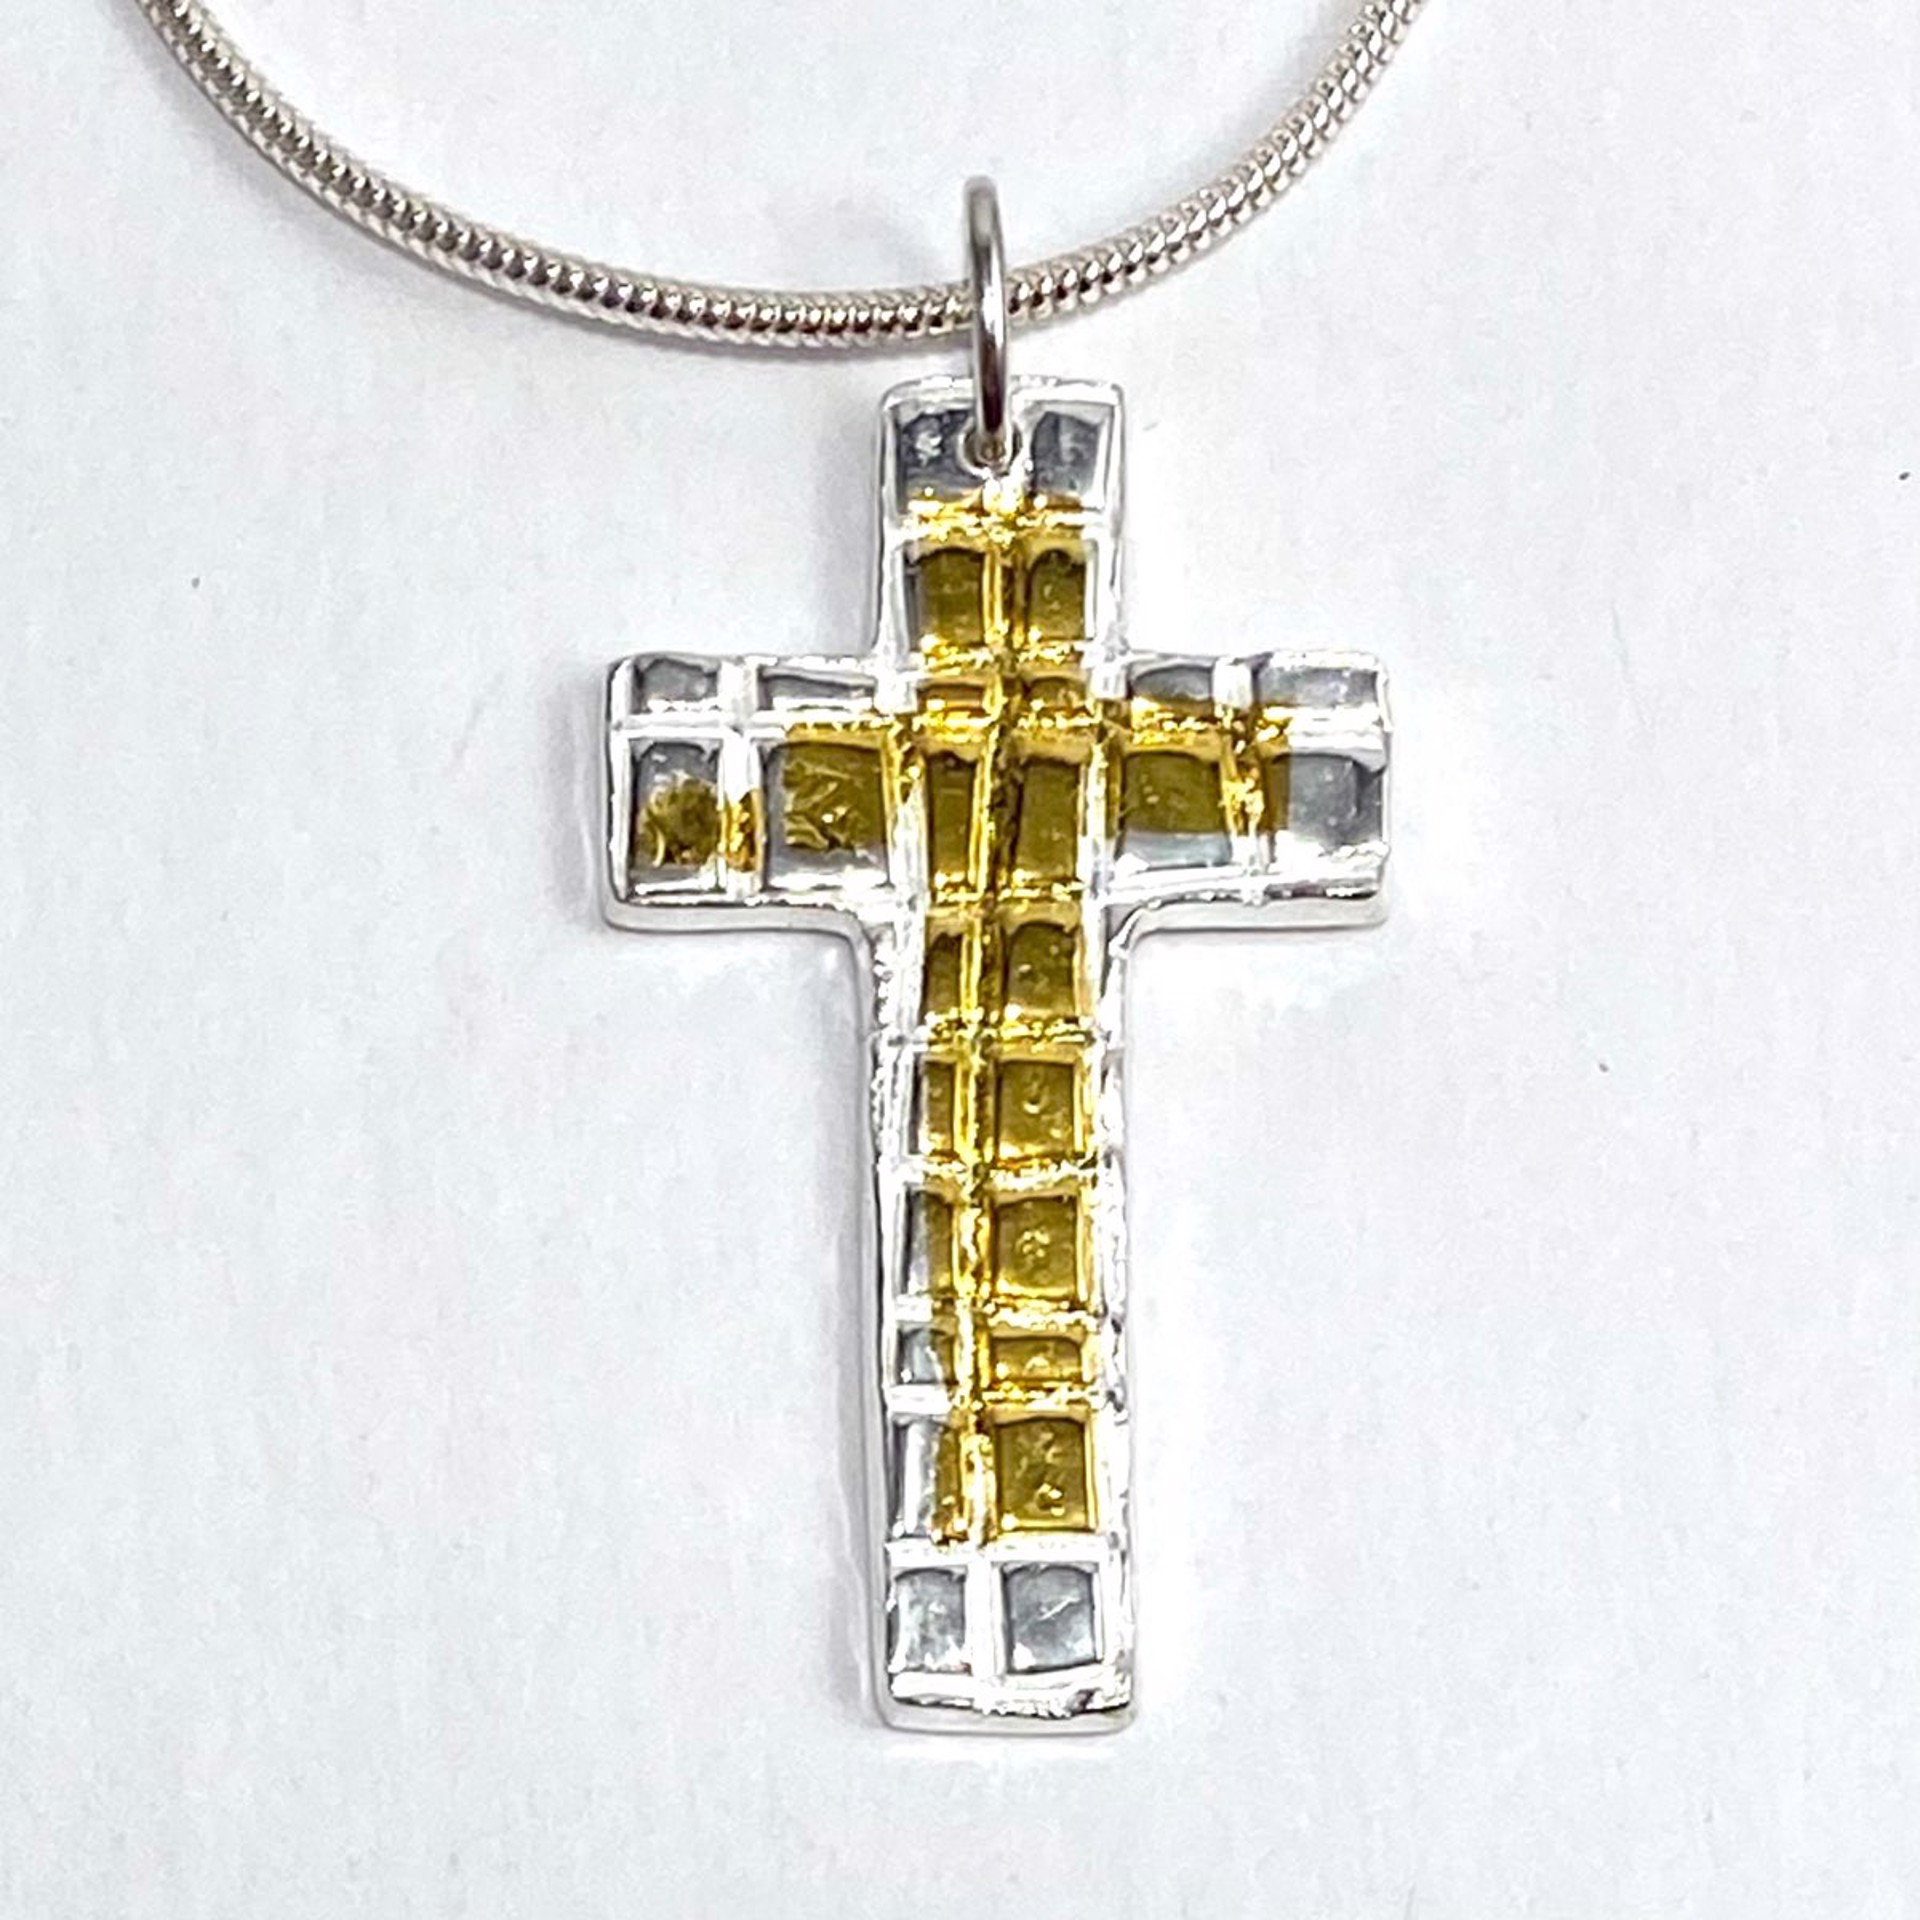 Keum-Boo Fine Silver and Gold Reversible Cross Necklace KH22-68 by Karen Hakim